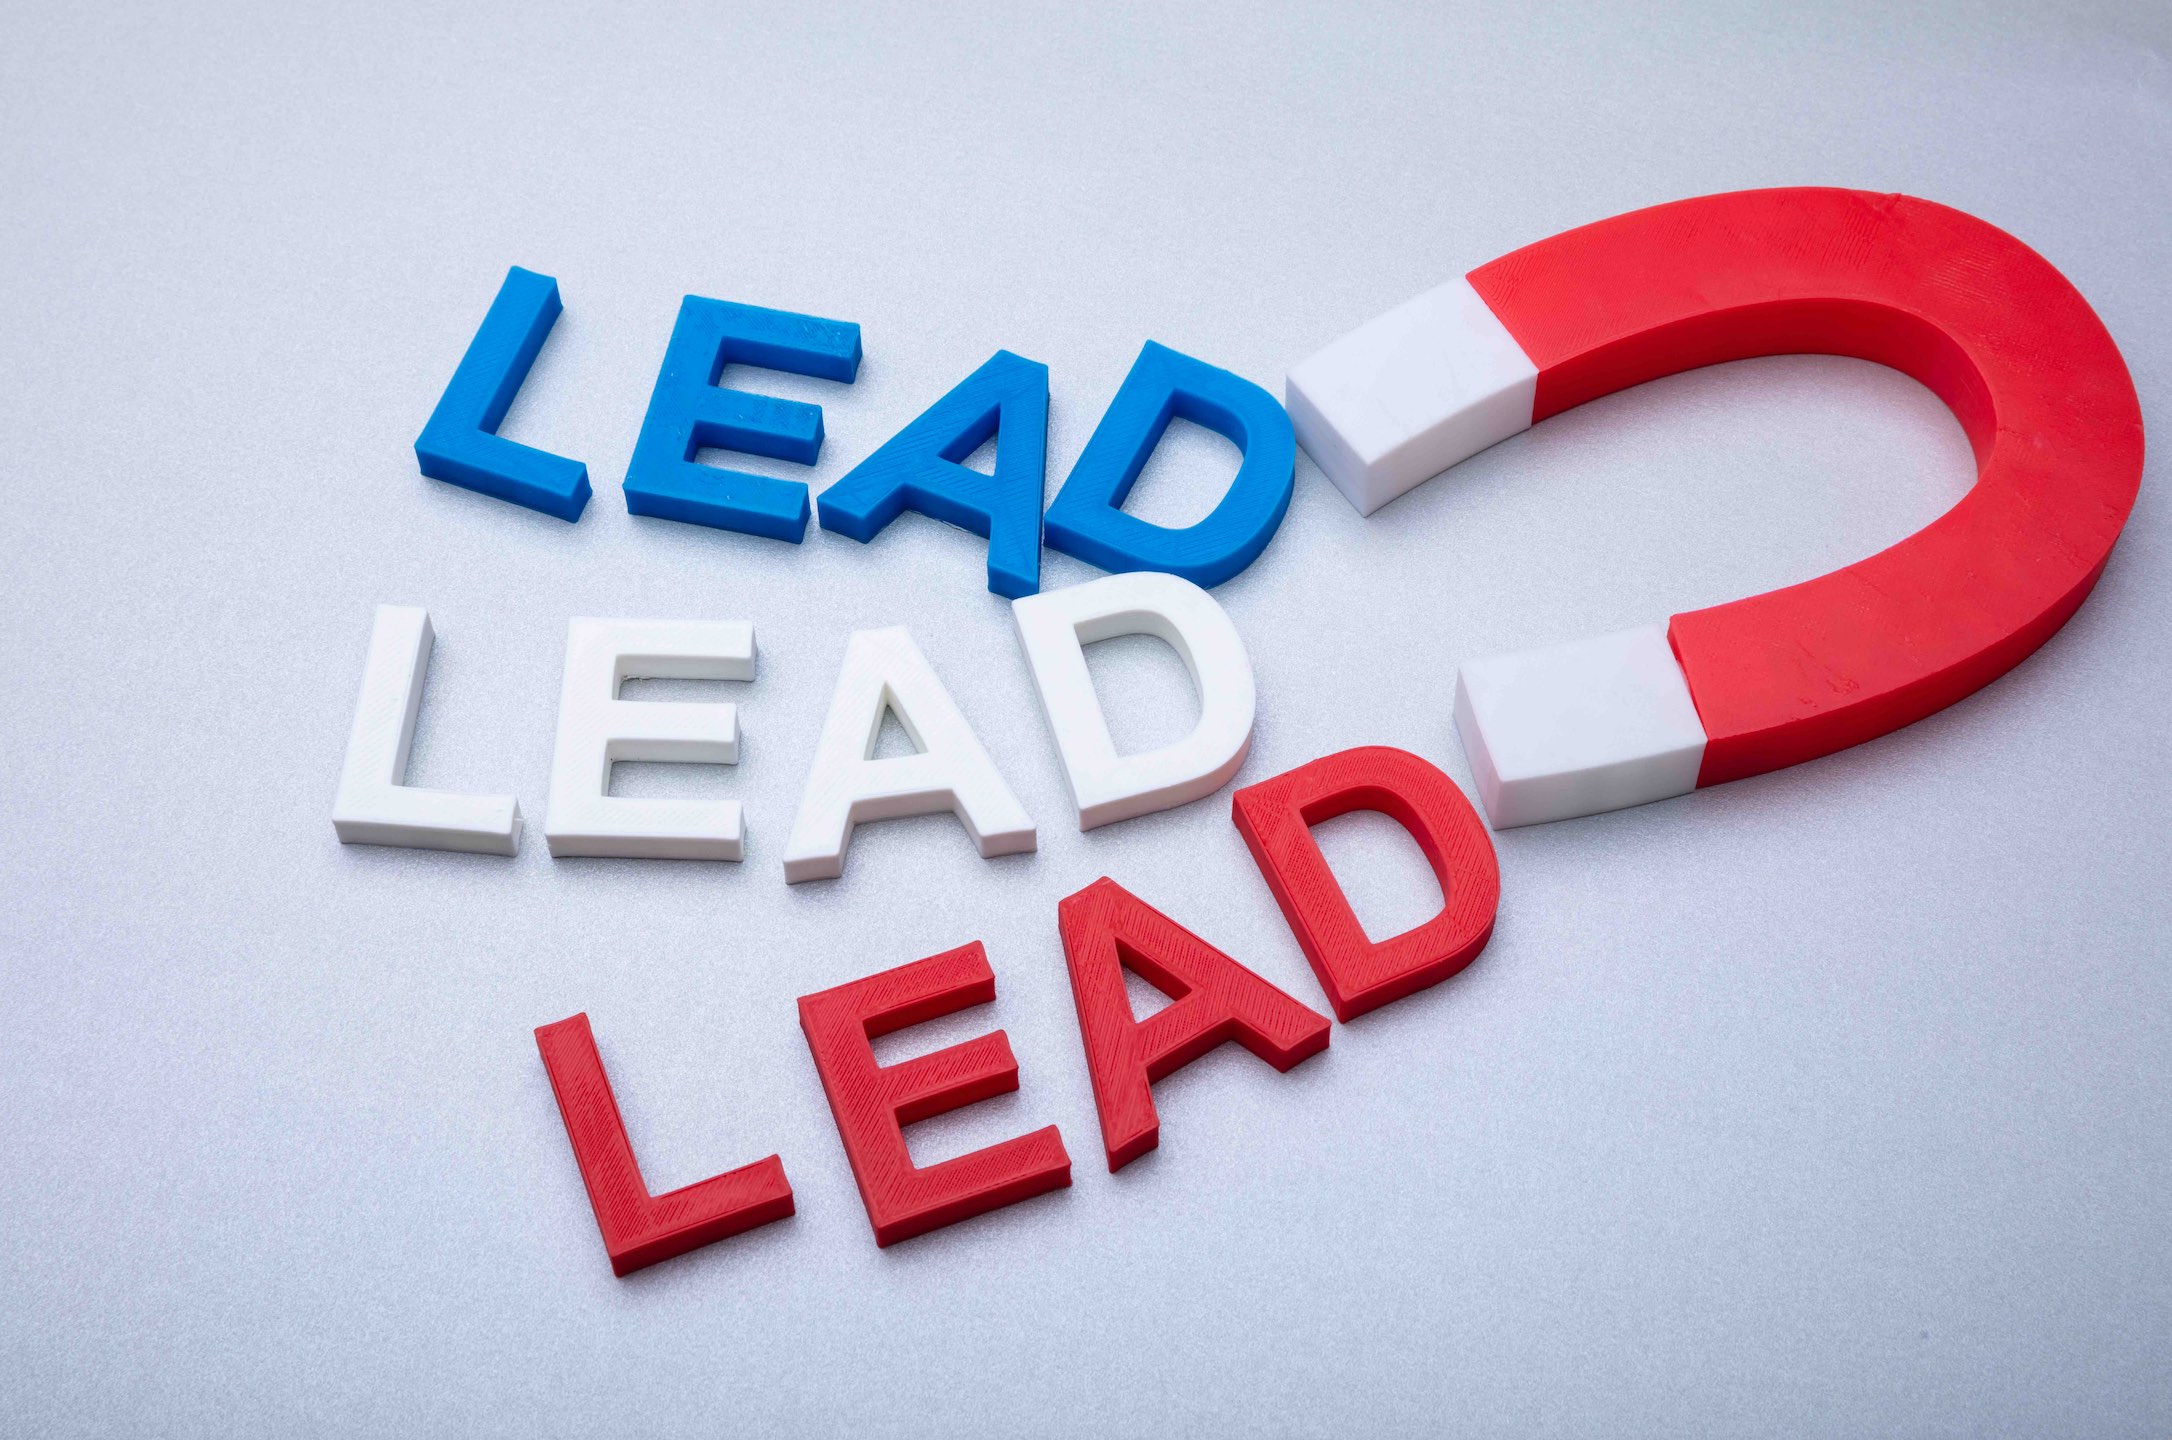 The Importance of a Lead Generator